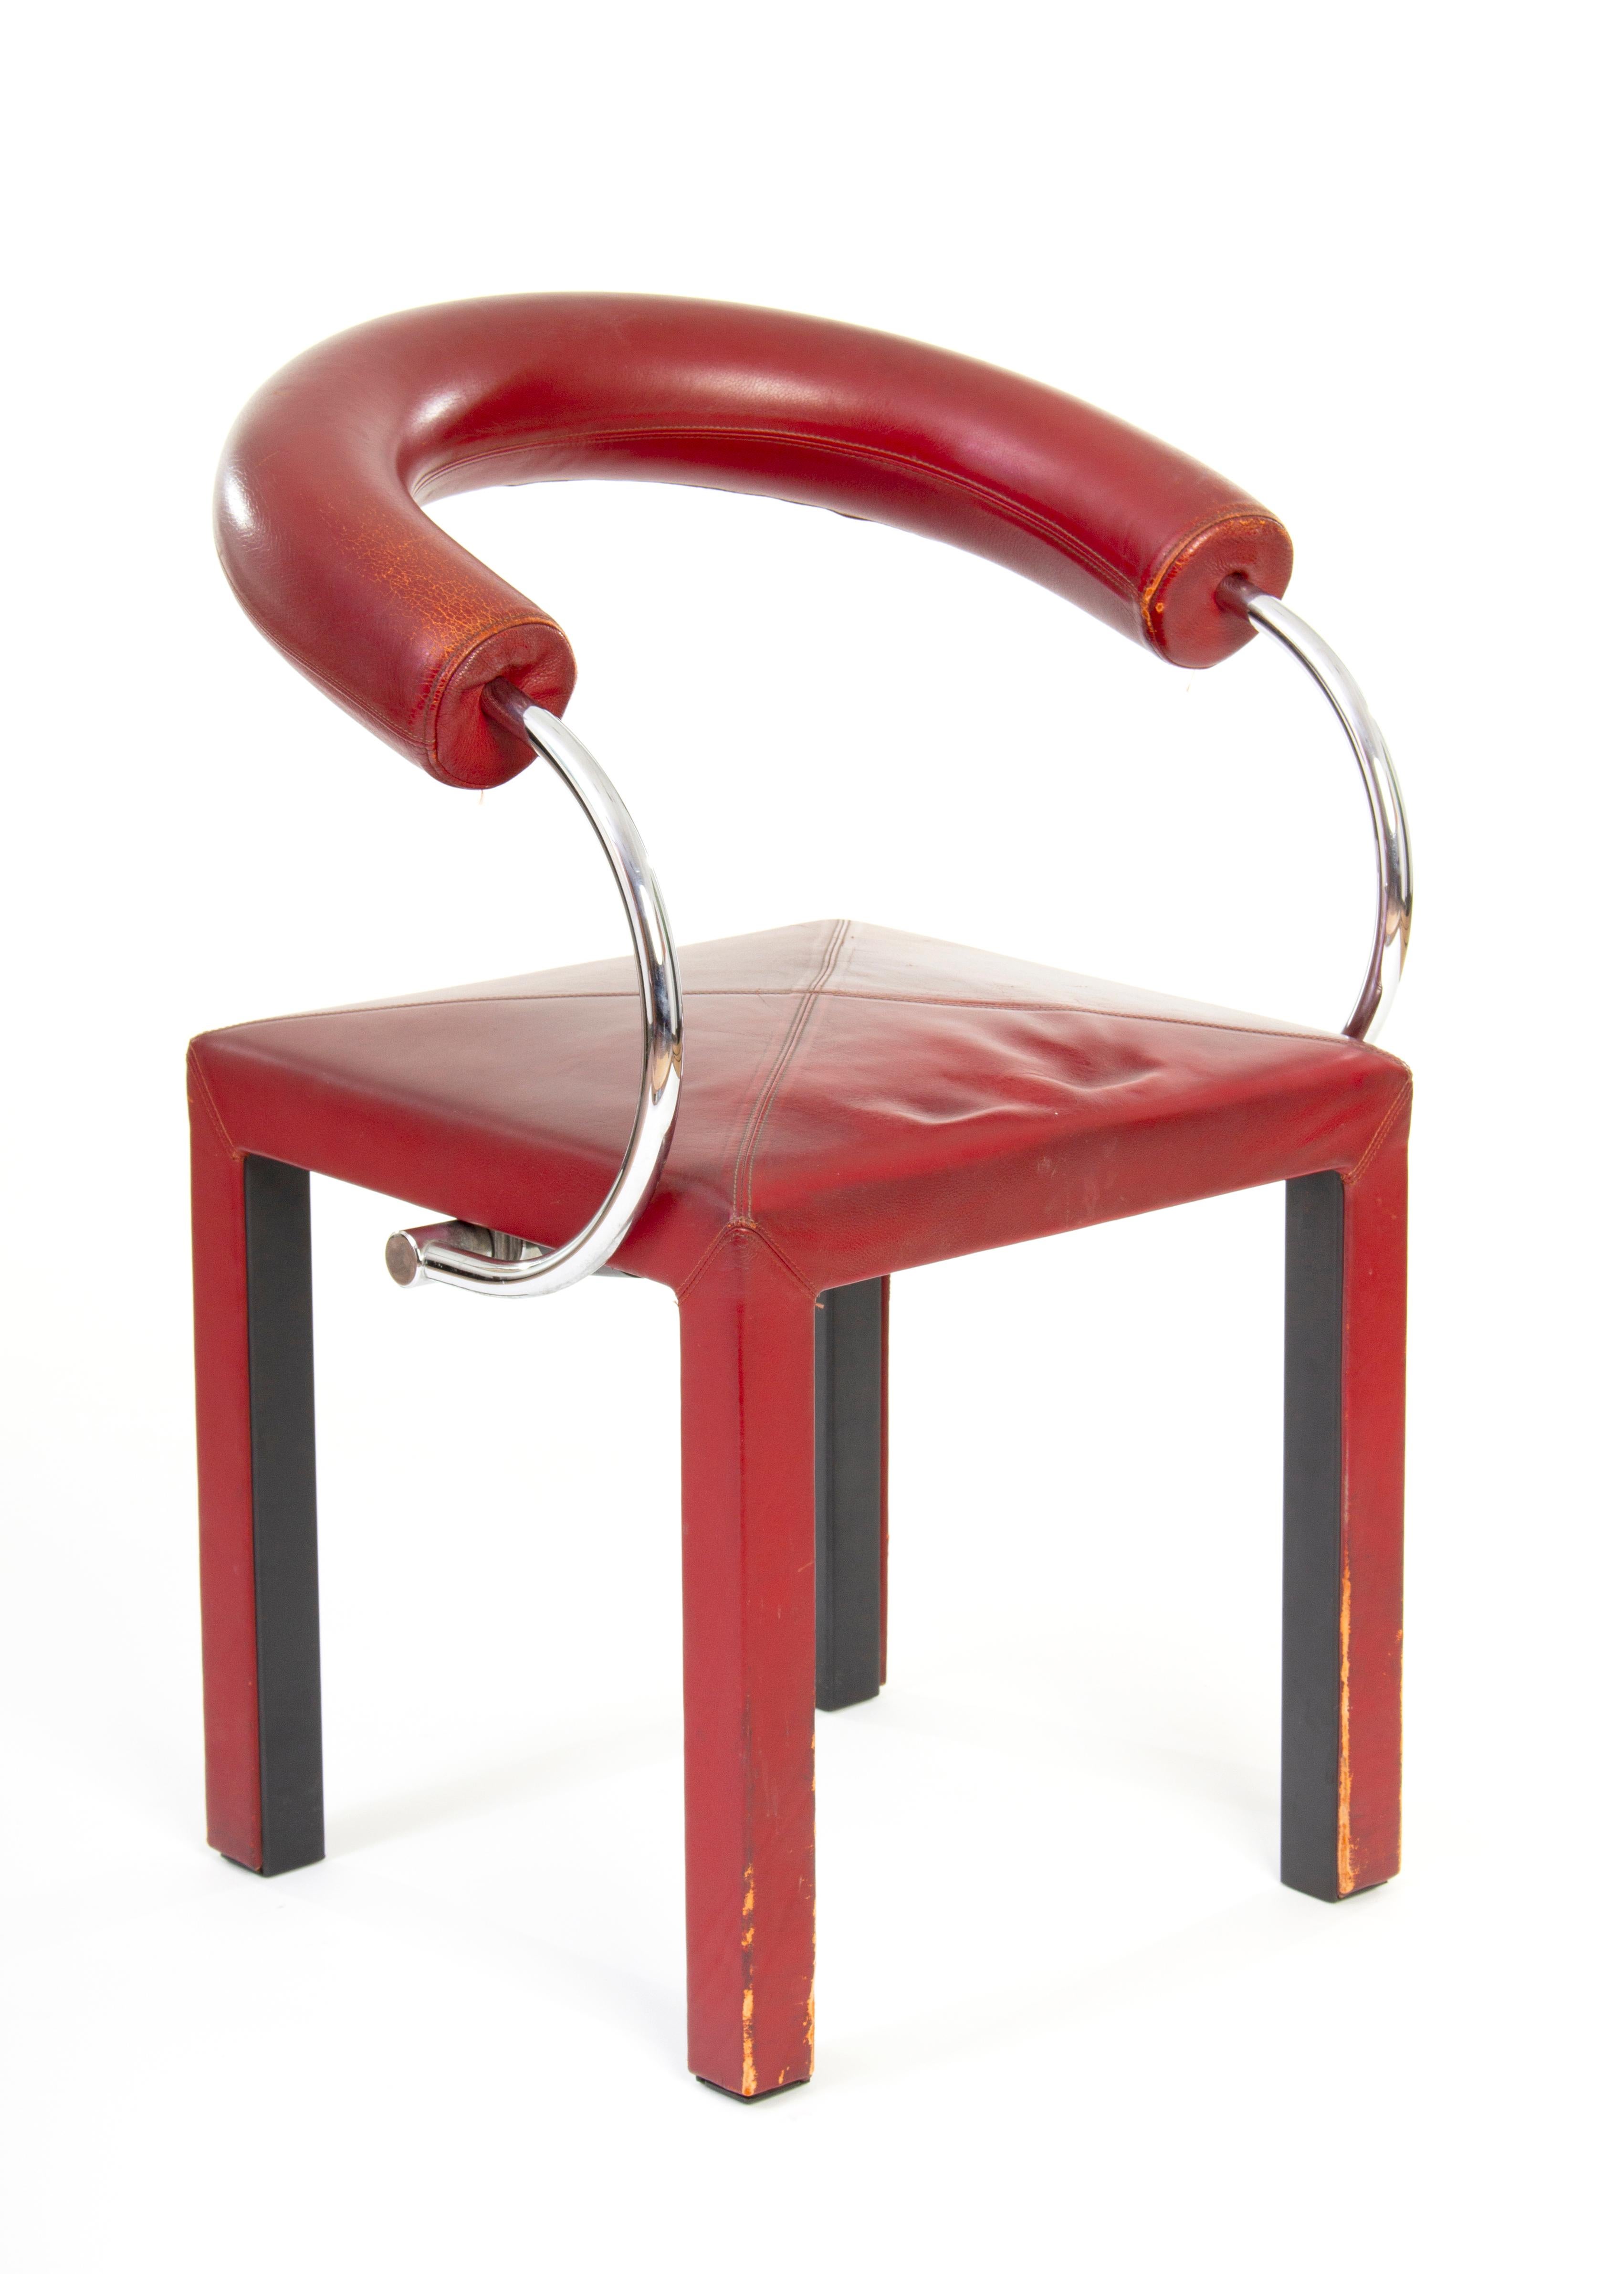 B&B Italia armchair set, desiged by Paolo Piva.
The sets are unique for their curved backrest.
The covers are red leather, that need some refurnishing.
